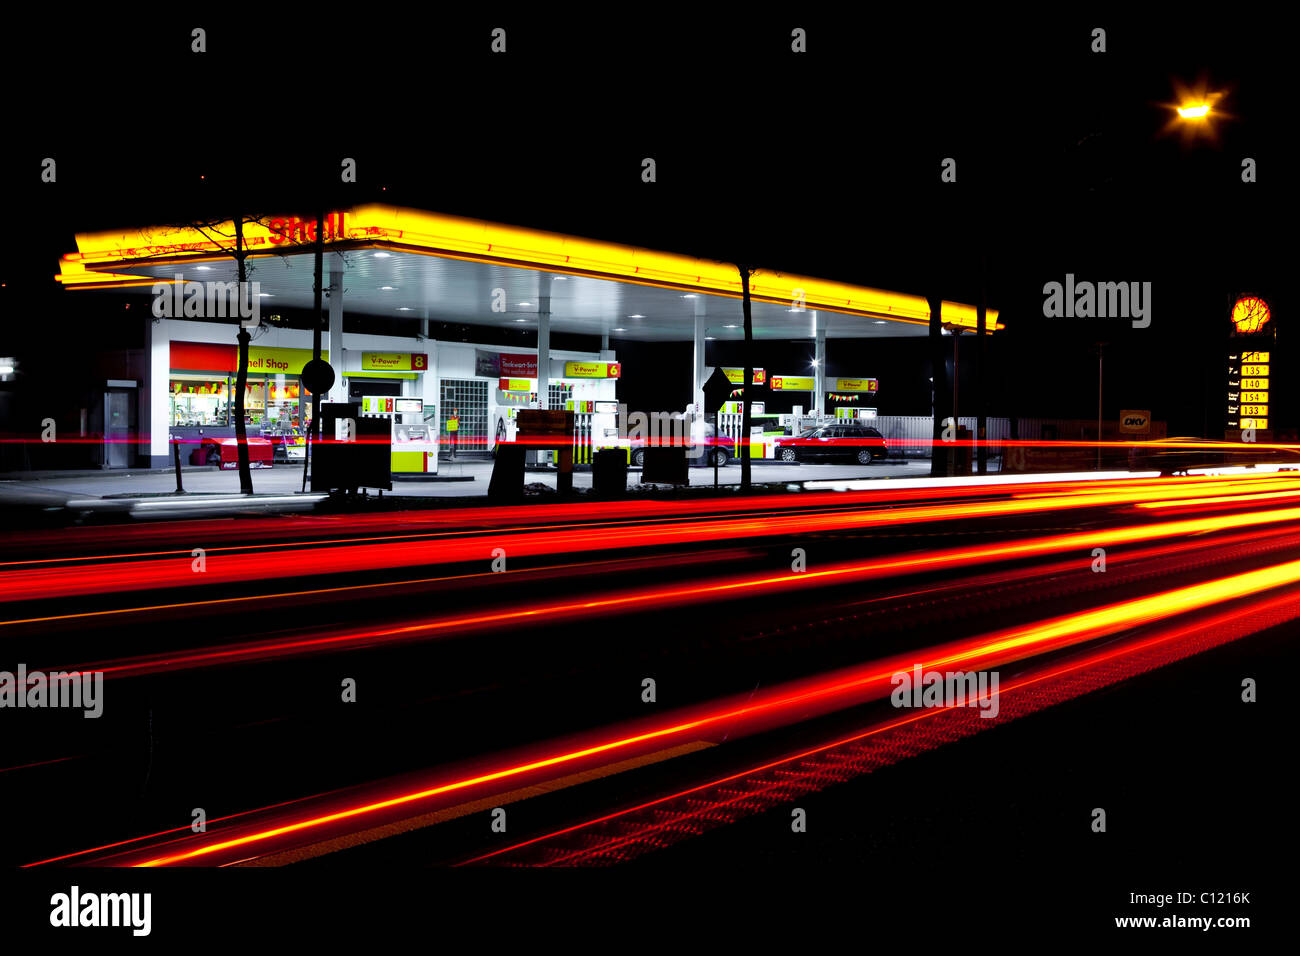 Shell gas station at night with car traffic Stock Photo